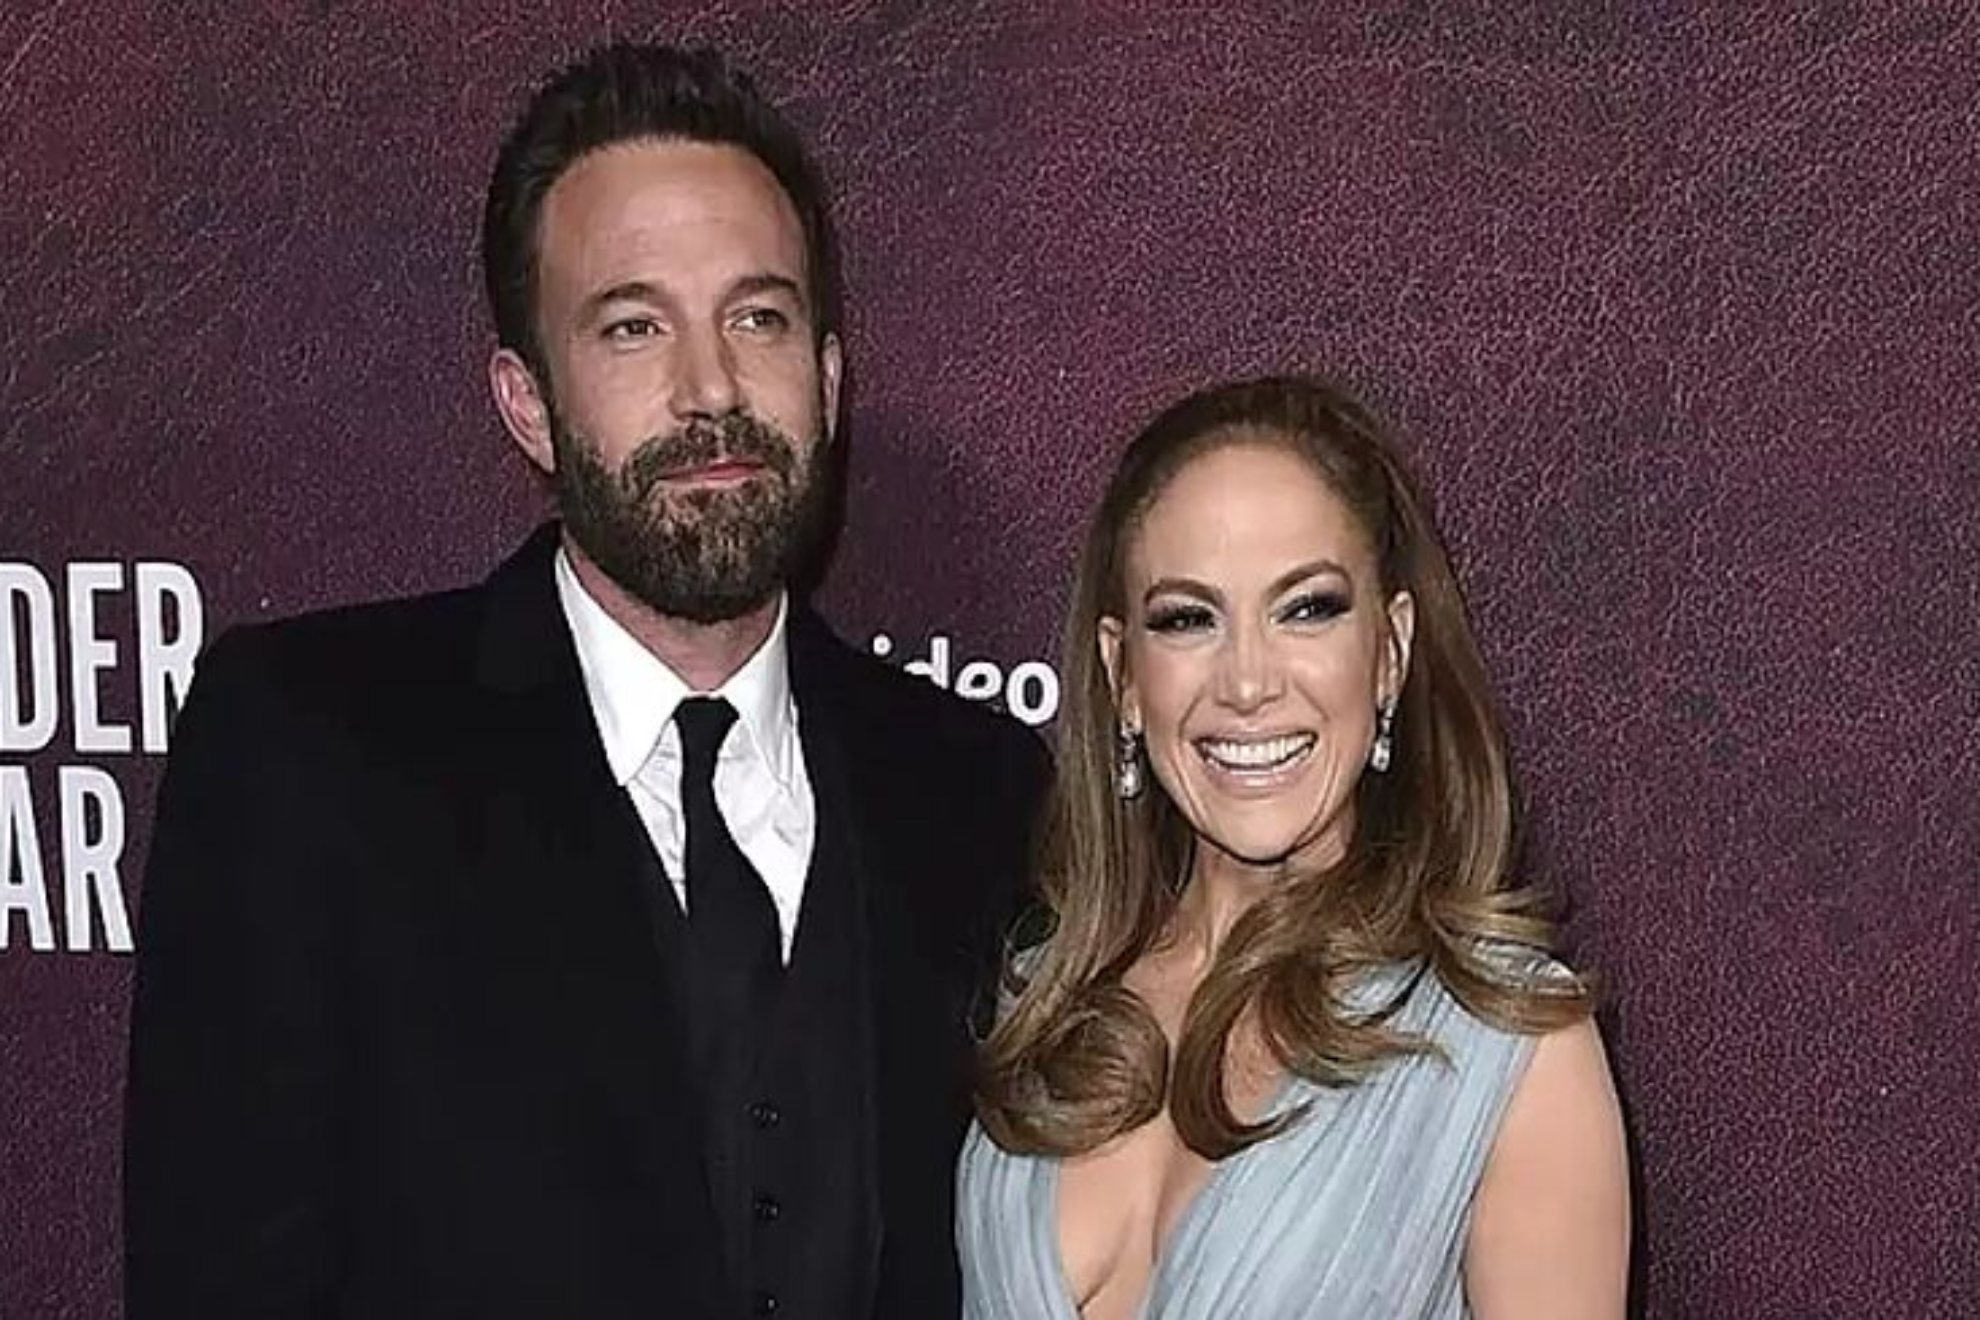 Jennifer Lopez and Ben Affleck, the unknown details of their first wedding anniversary dinner